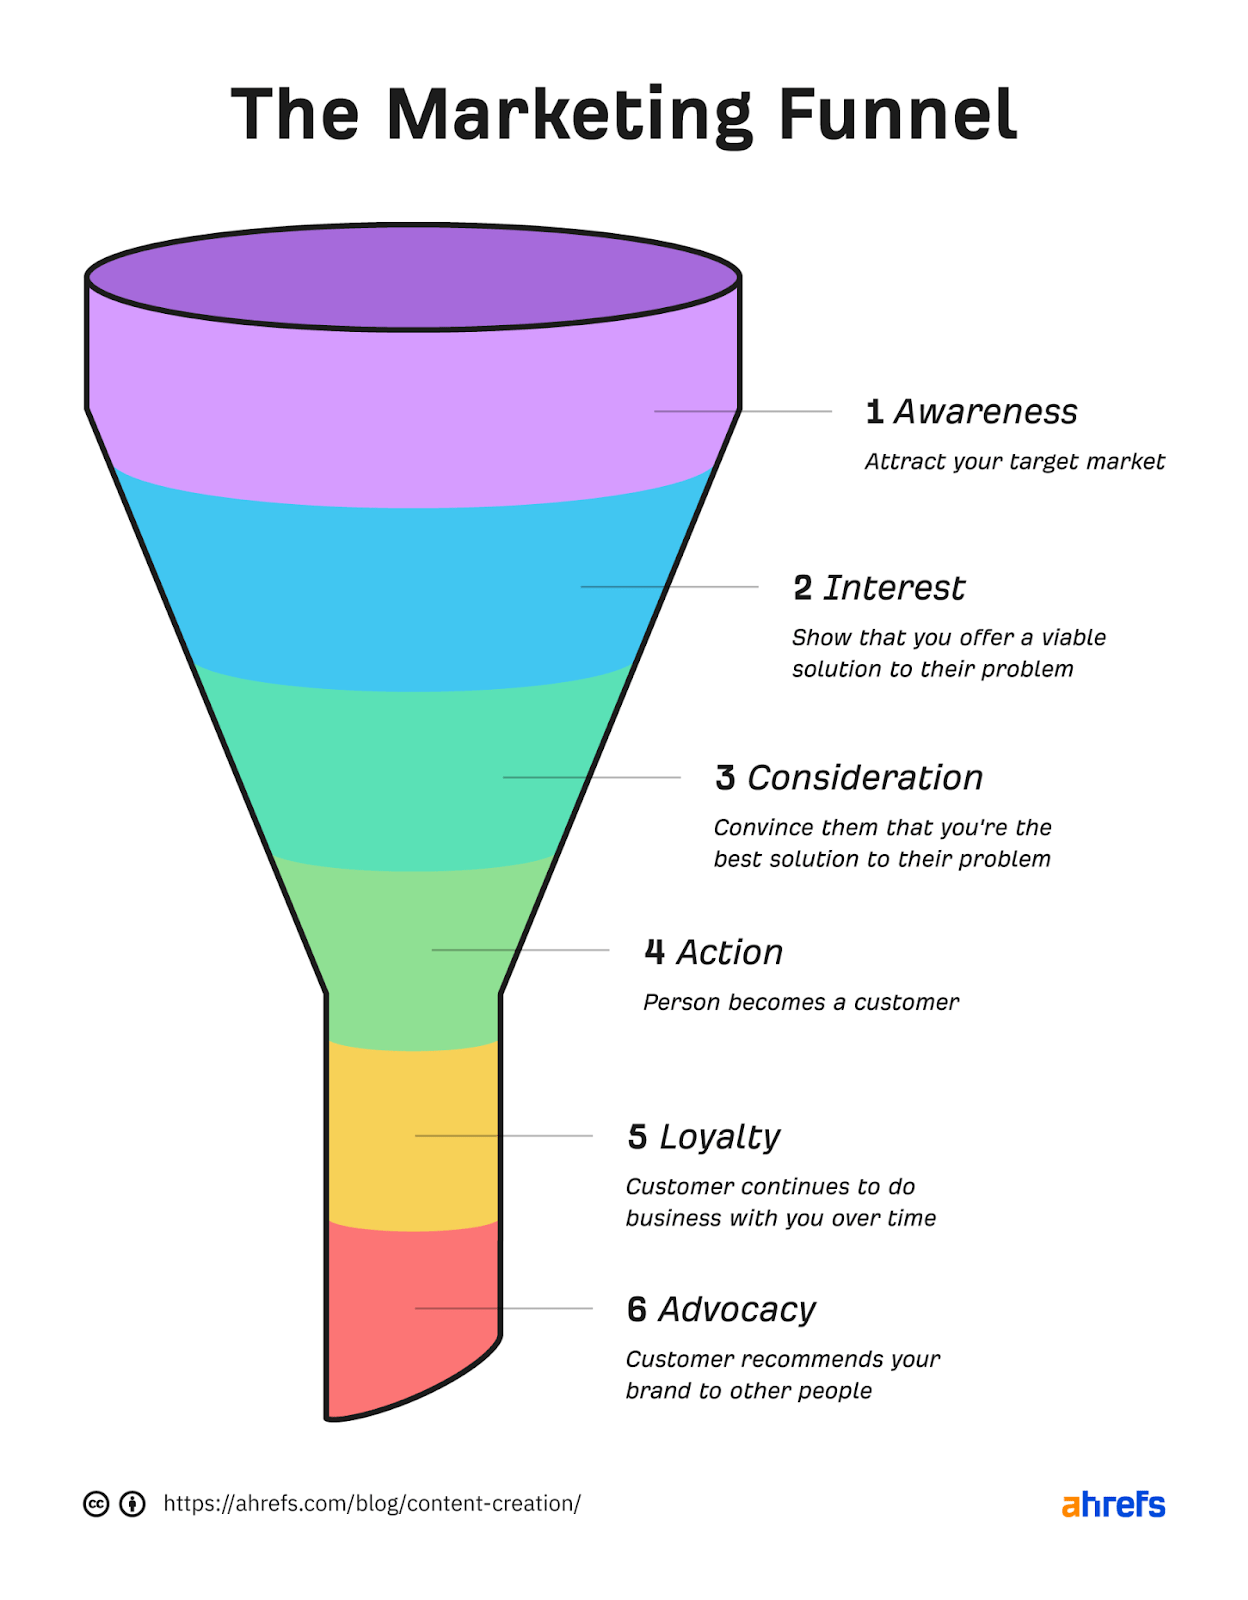 The Marketing Funnel.